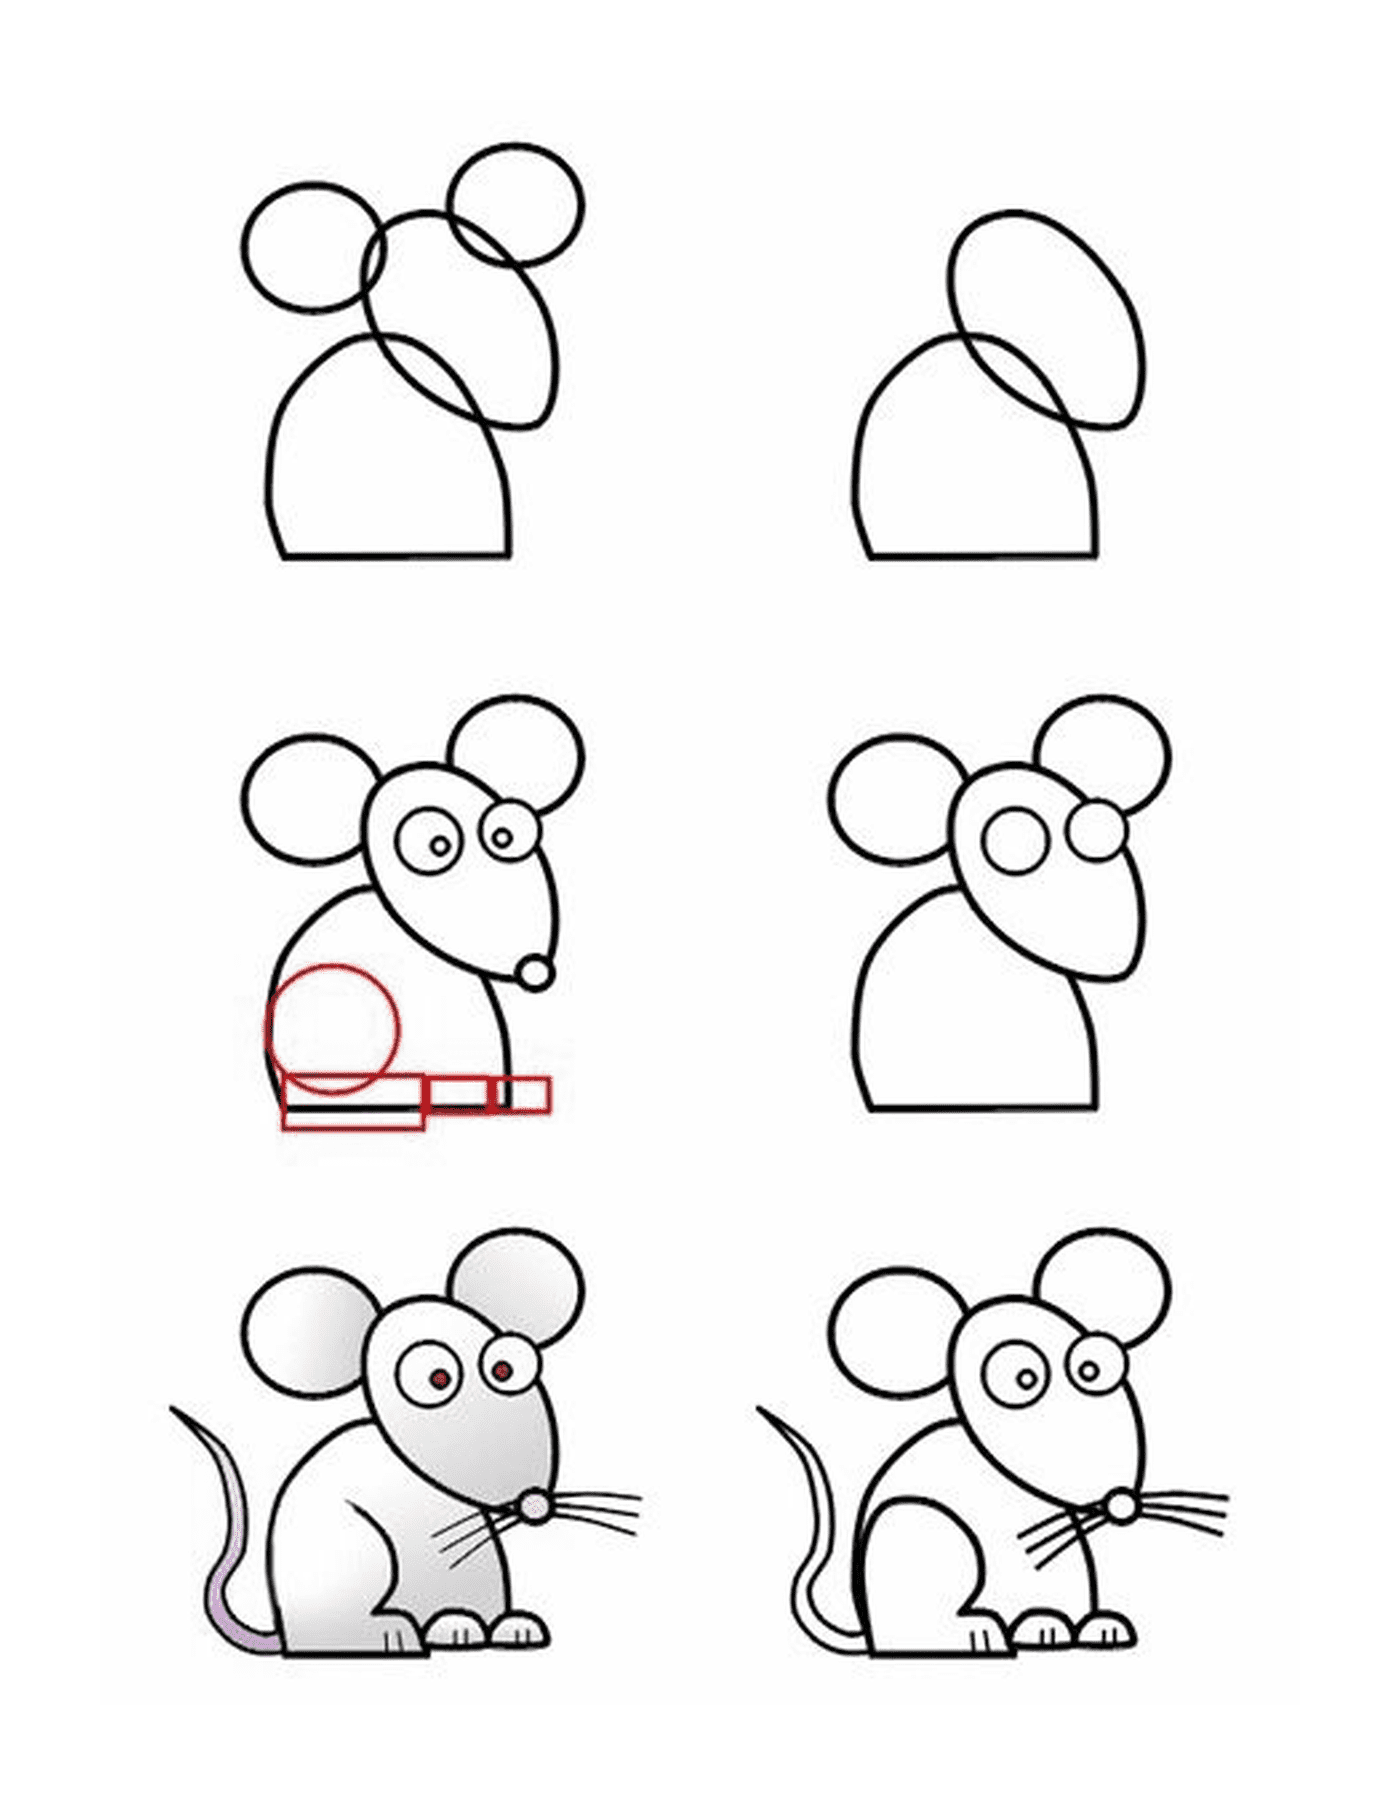  How to draw a mouse easily 